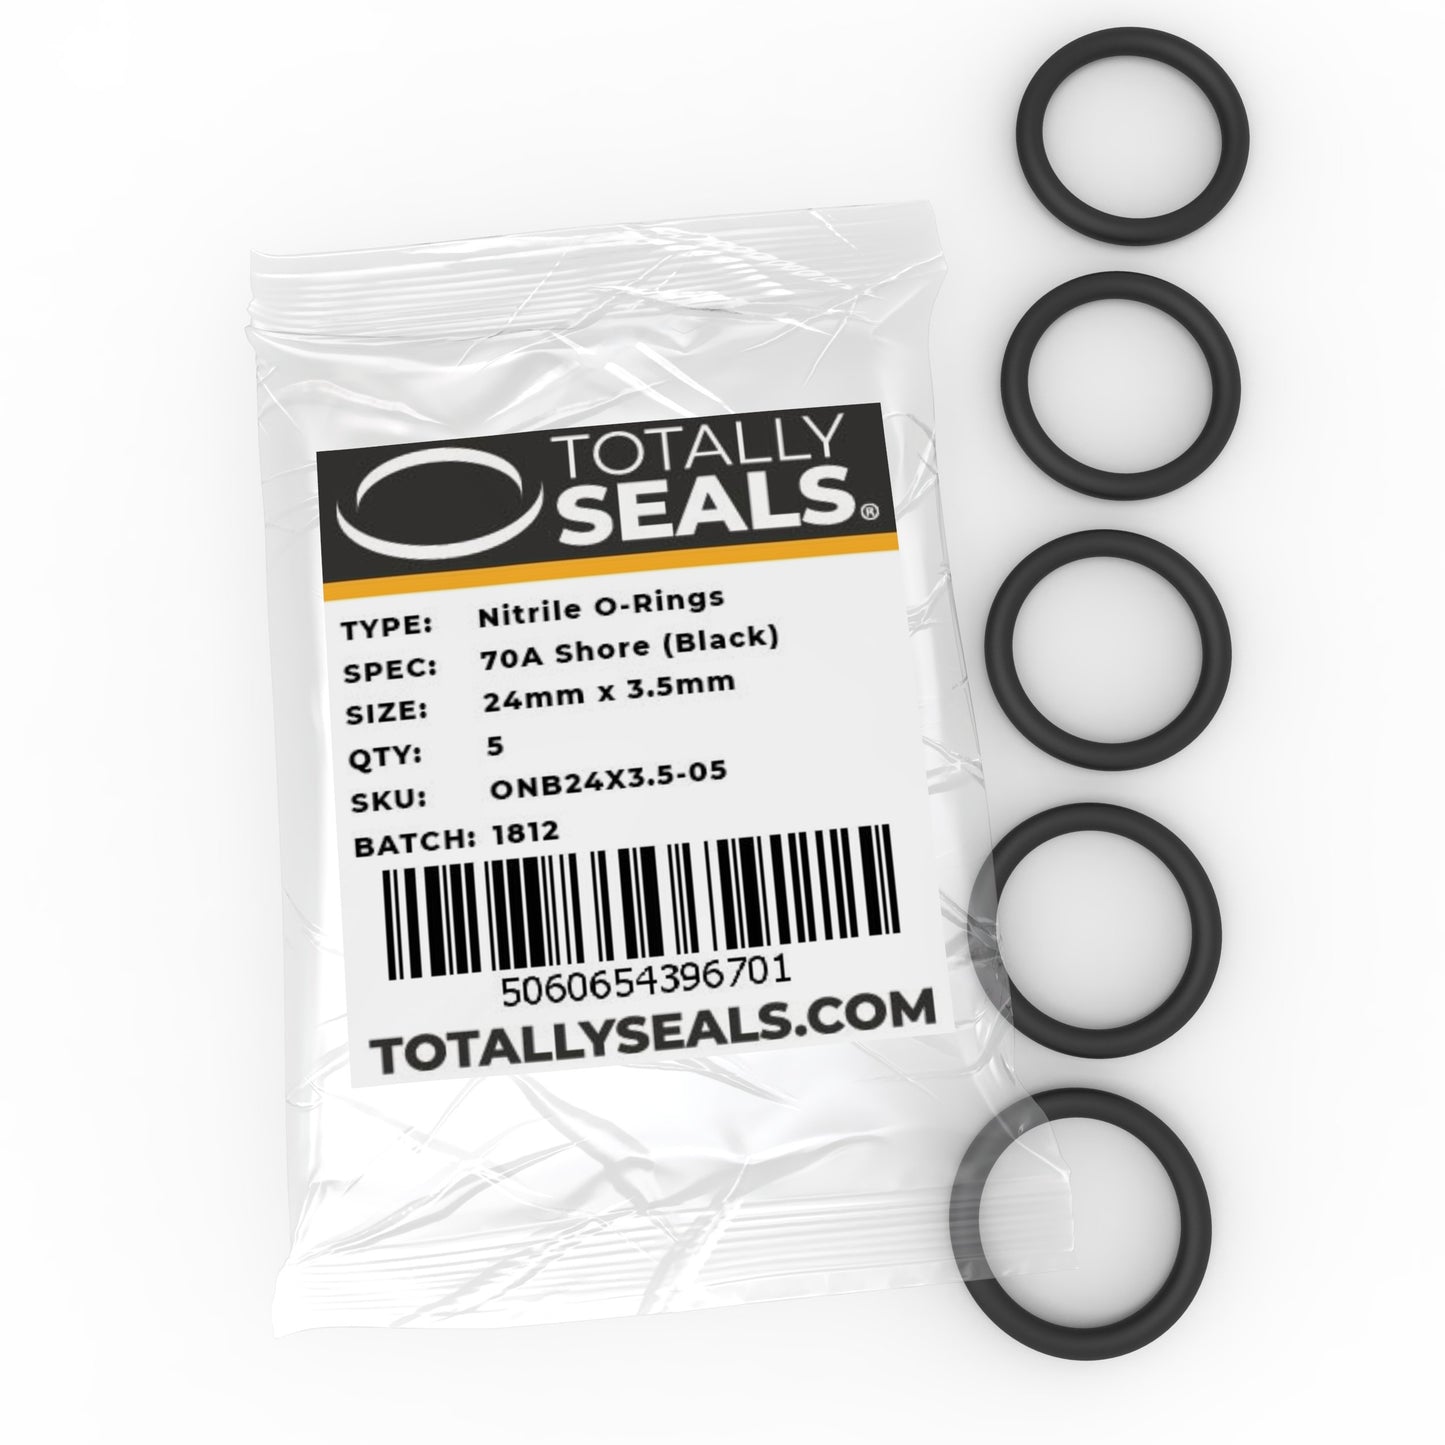 24mm x 3.5mm (31mm OD) Nitrile O-Rings - Totally Seals®